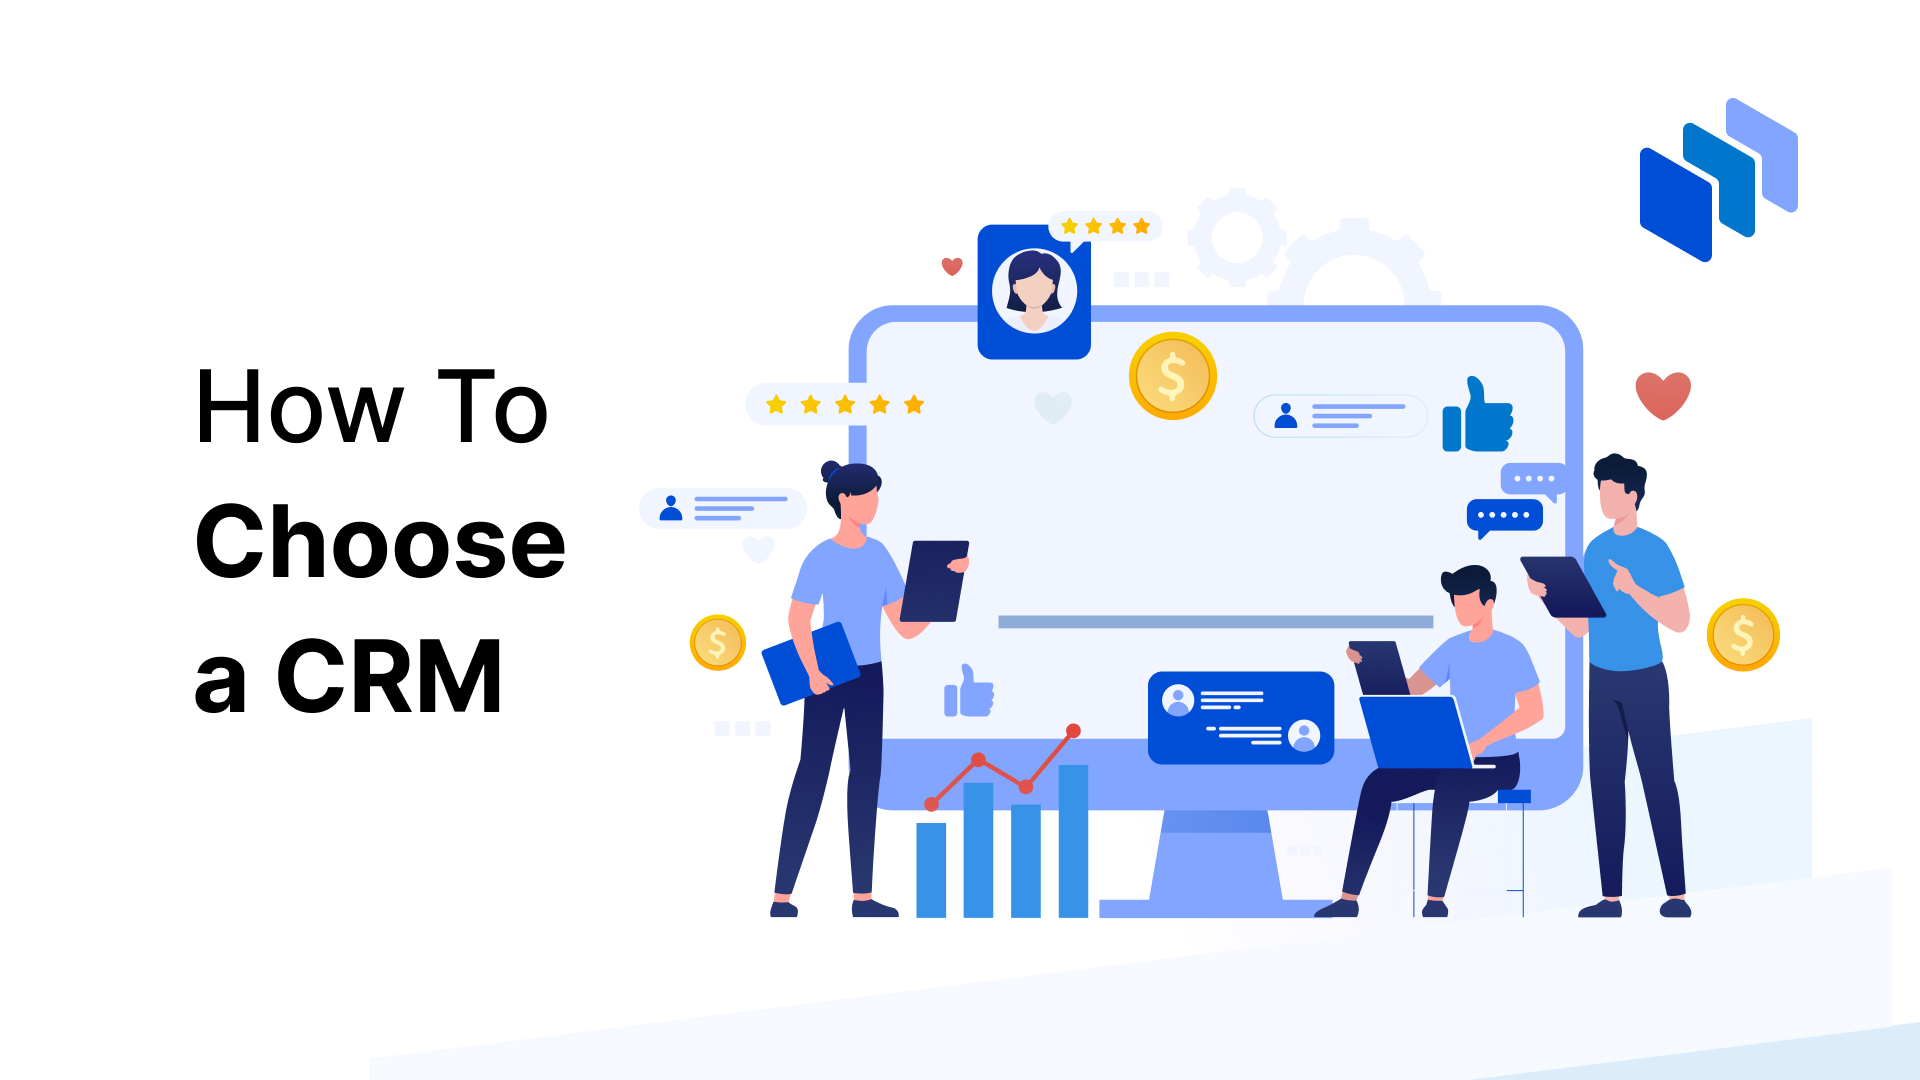 How To Choose a CRM